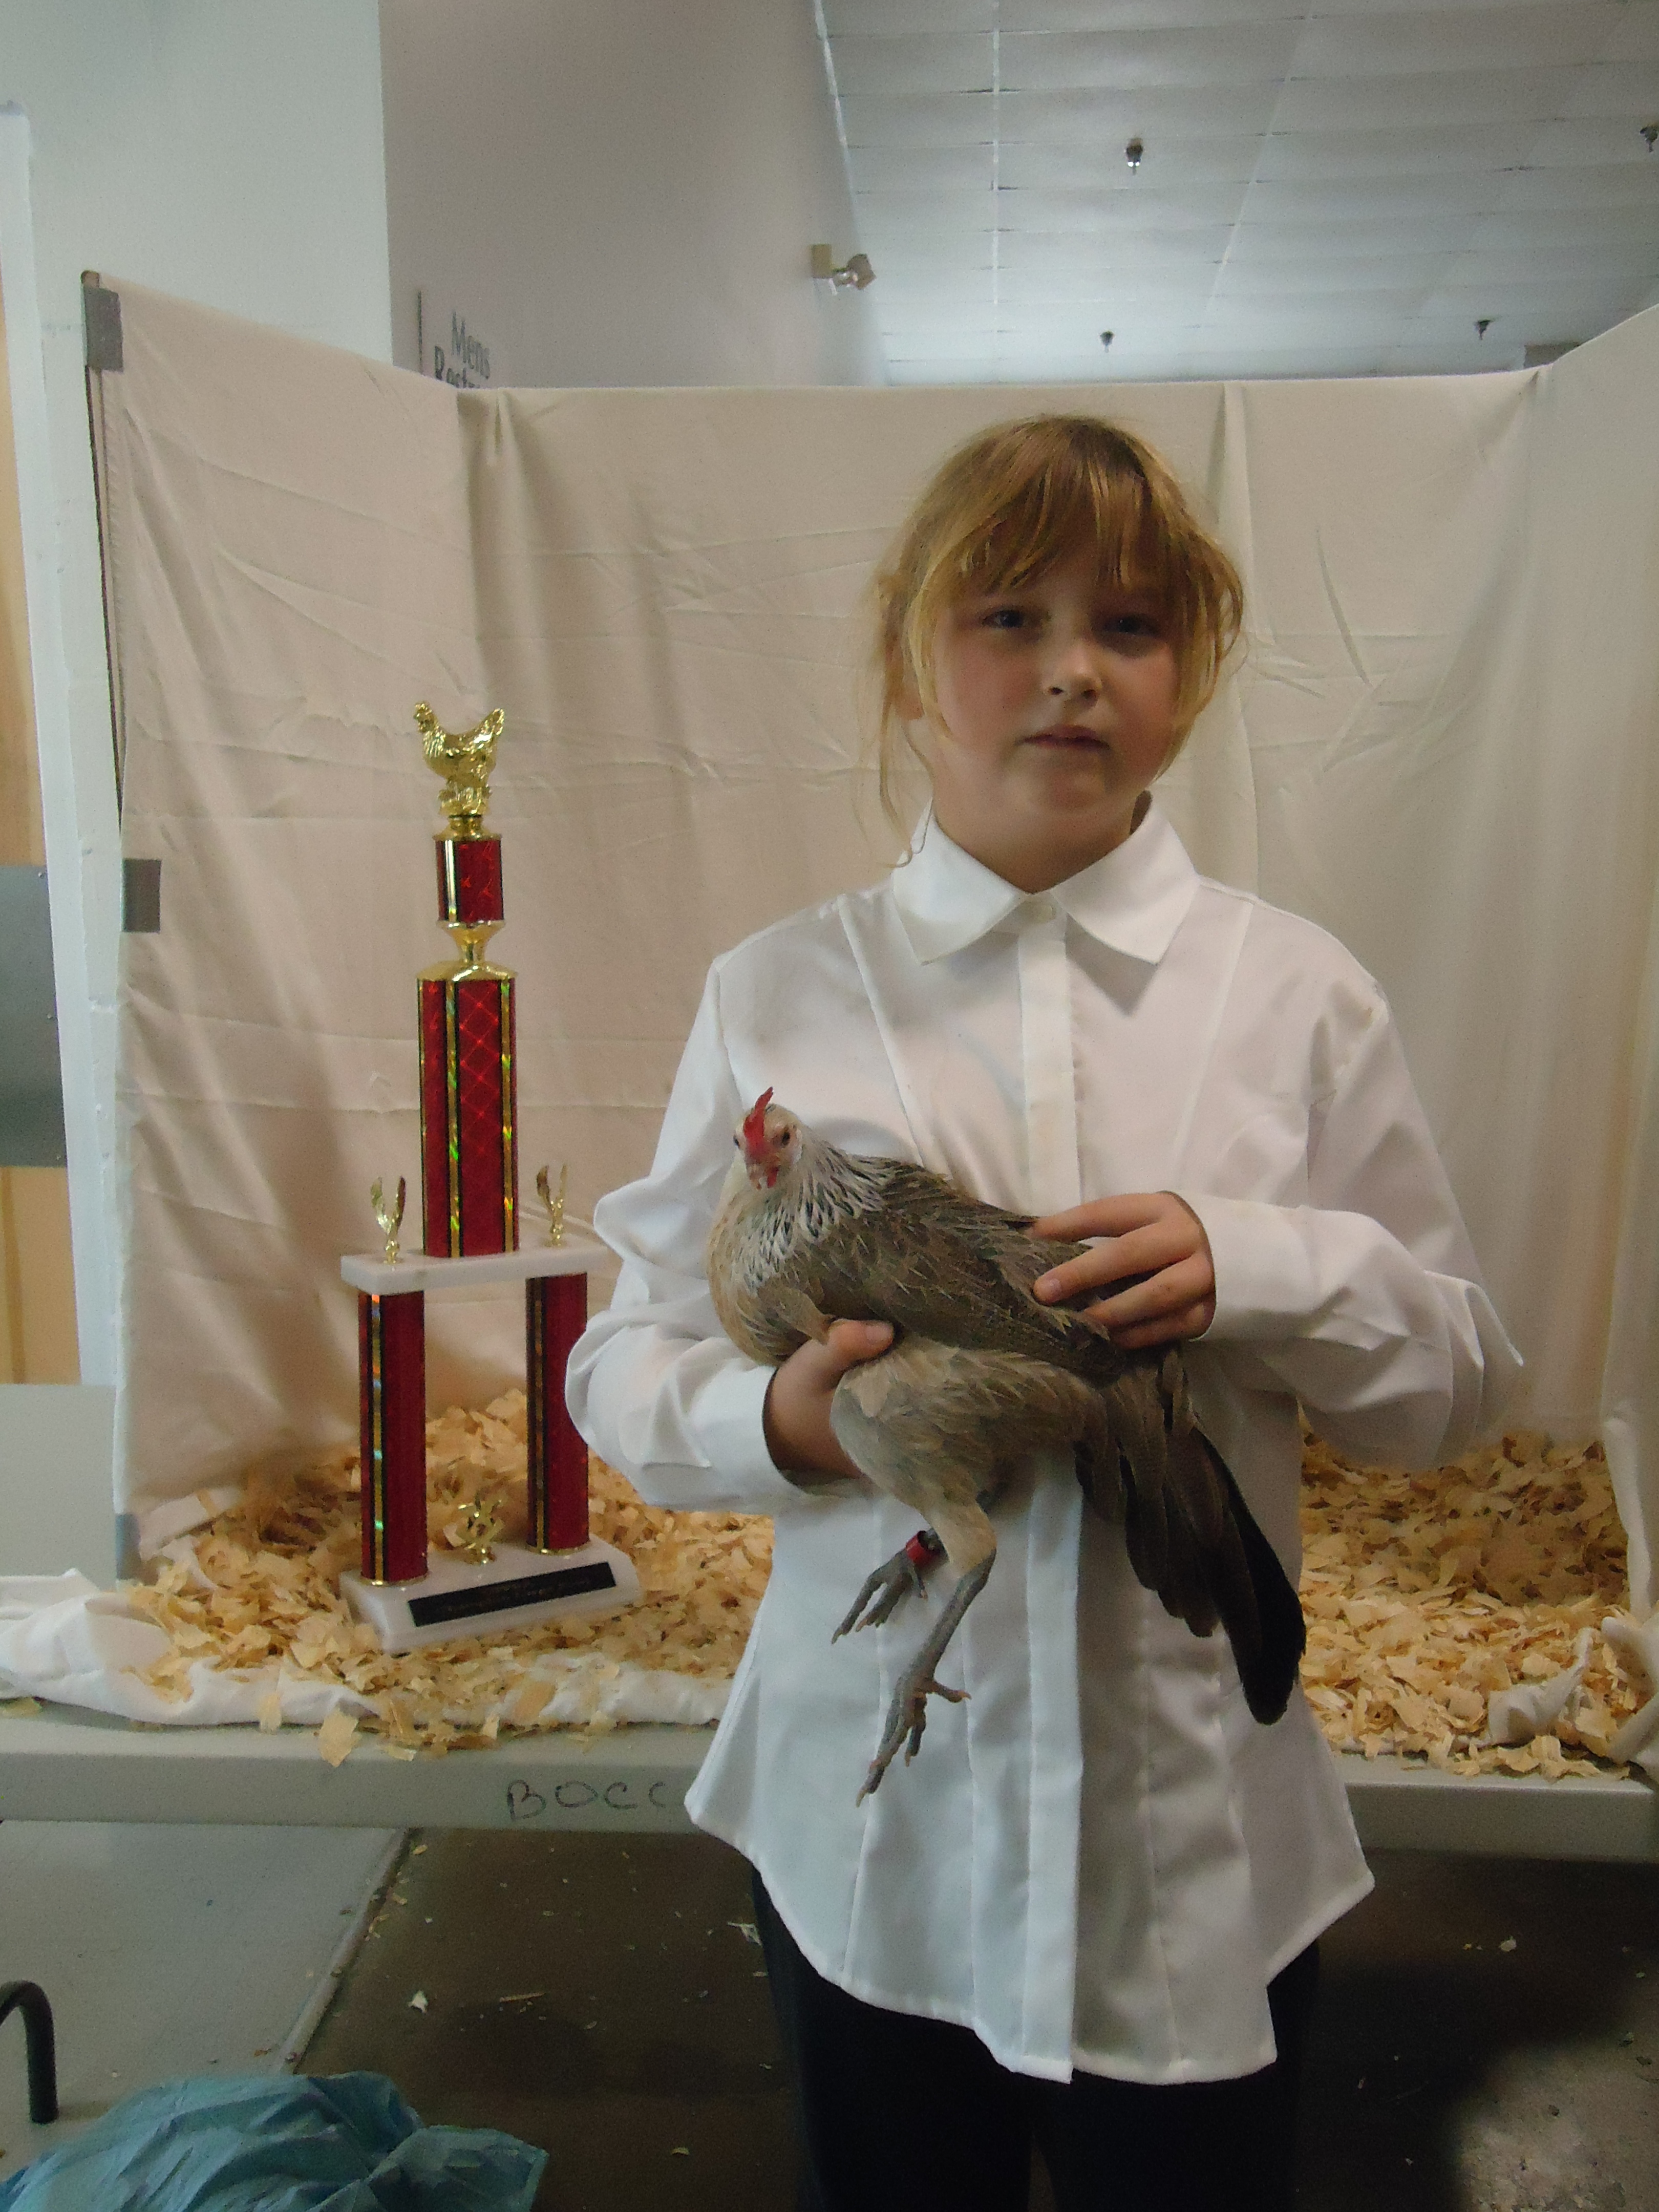 2011 Inverness,Fl show. My daughter, Kaycee and her pullet showing off 
Their Champion trophy.